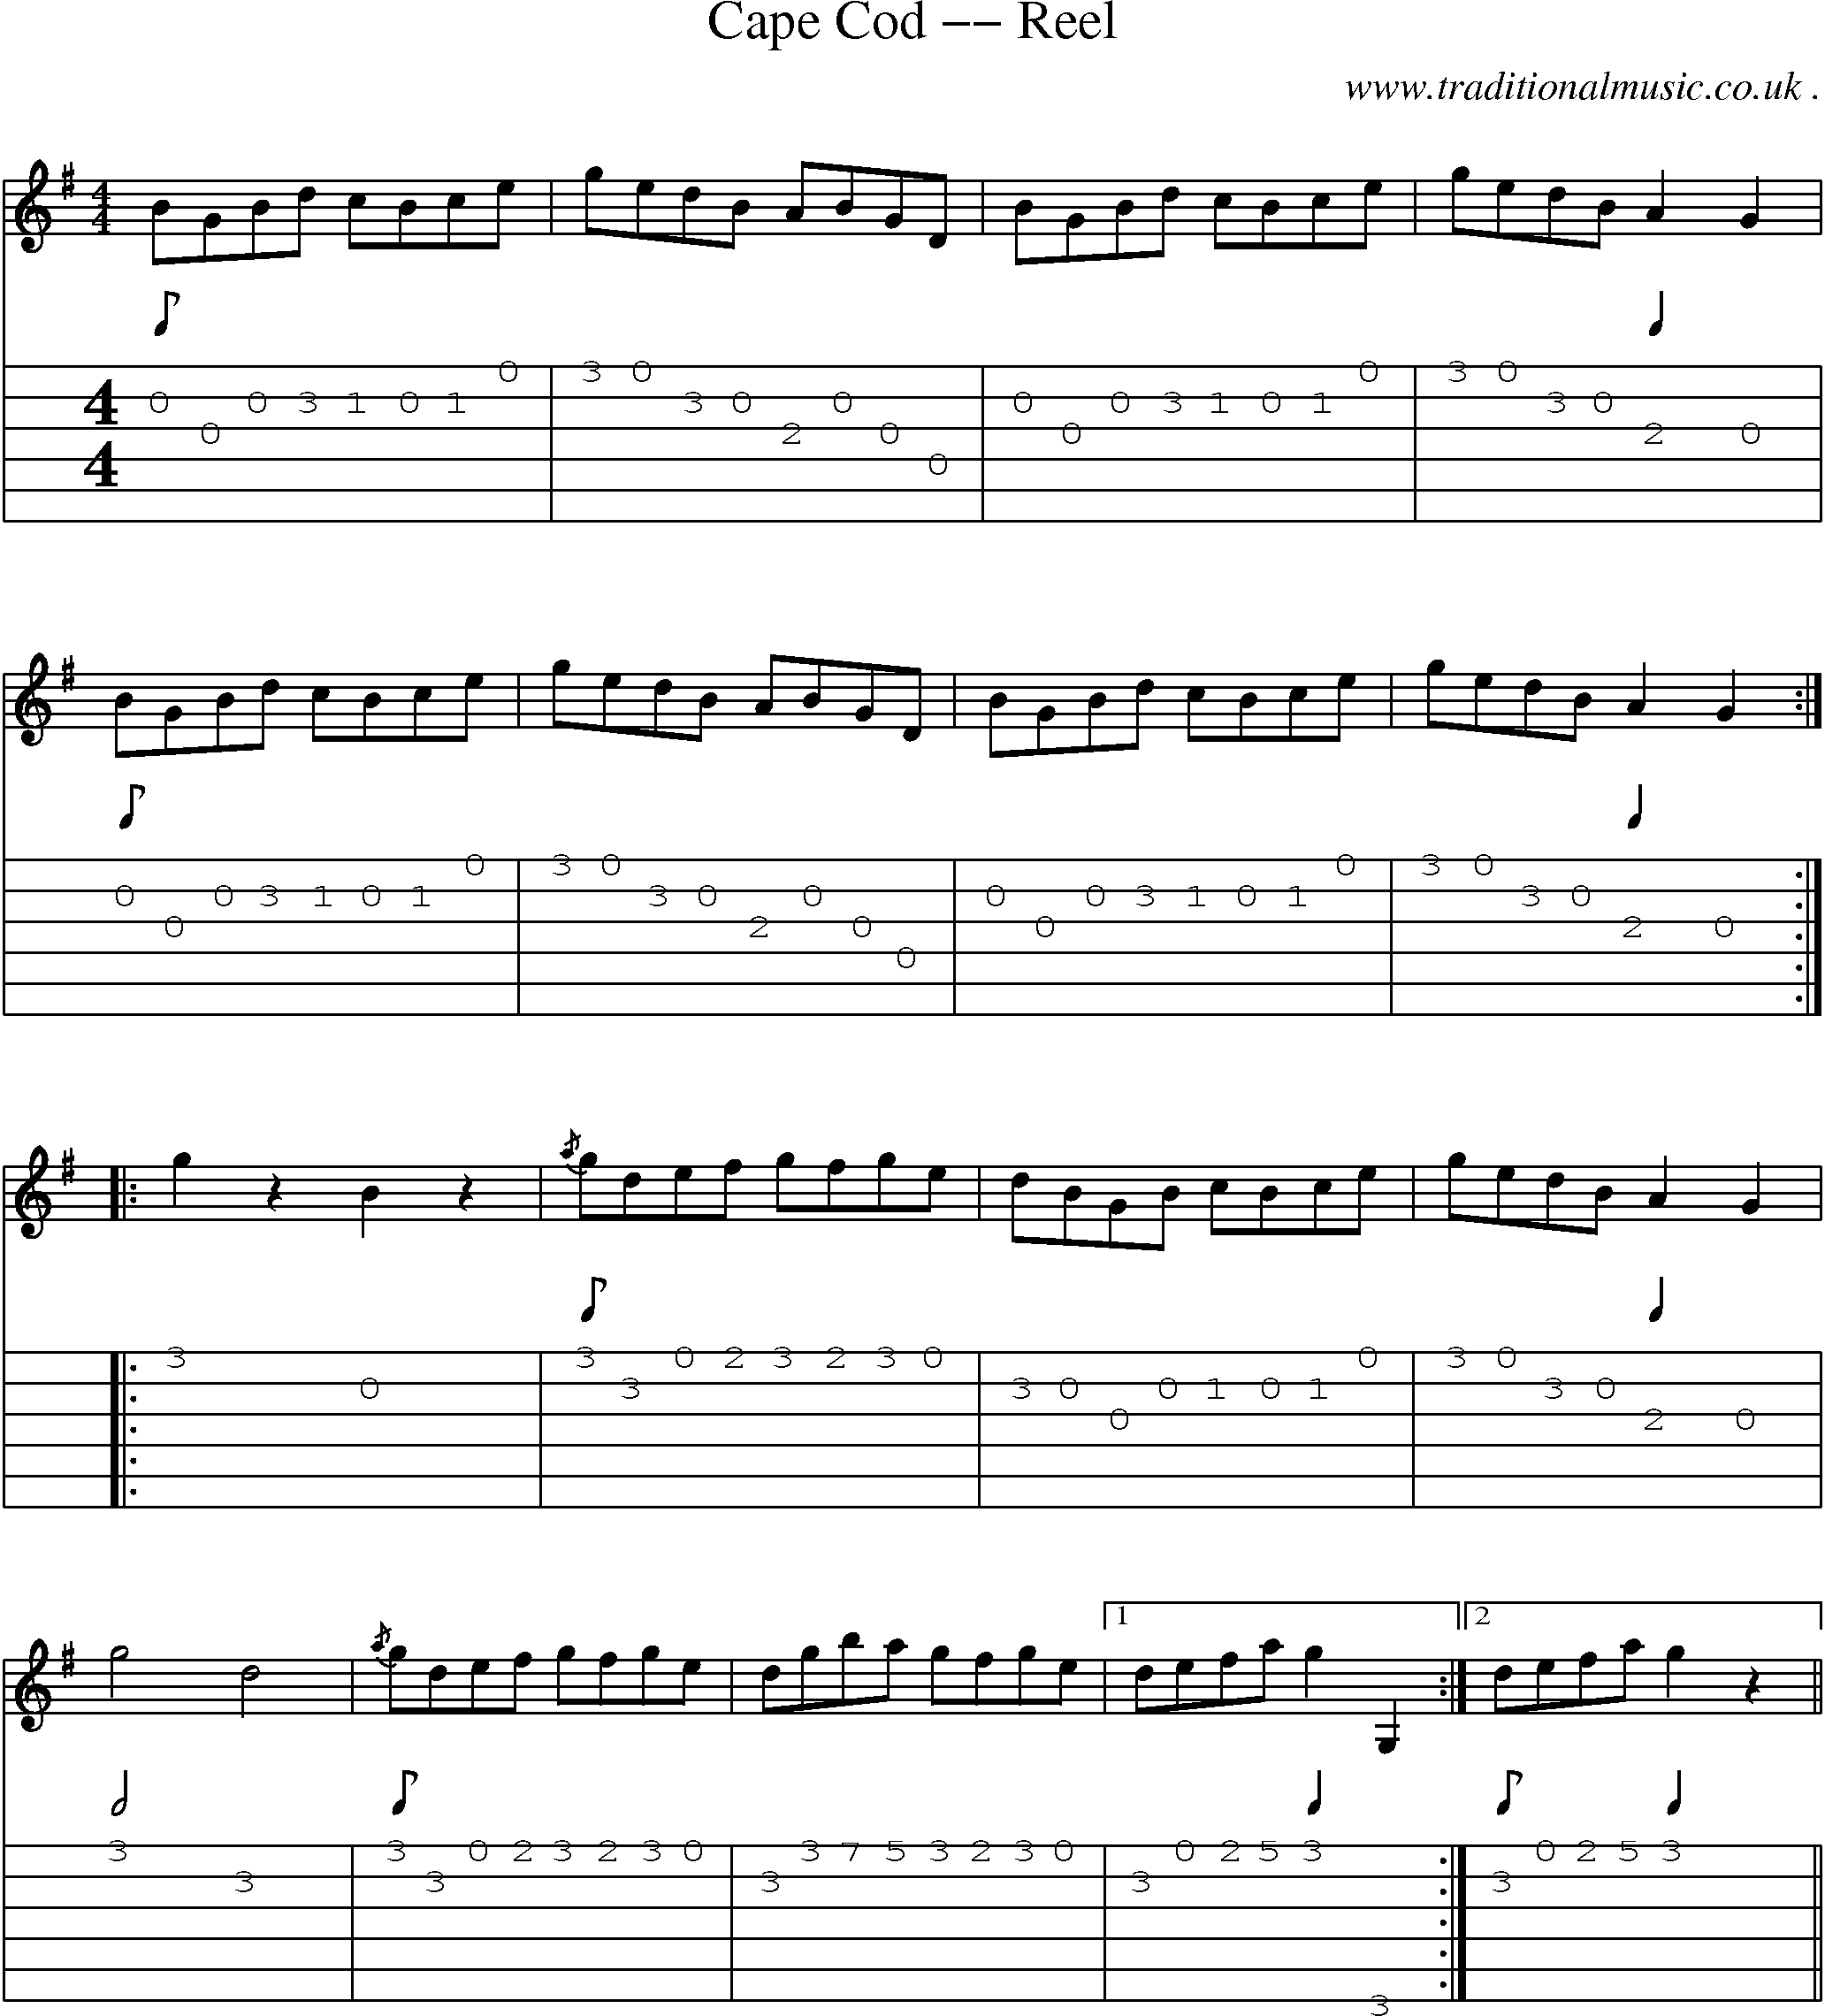 Music Score and Guitar Tabs for Cape Cod Reel